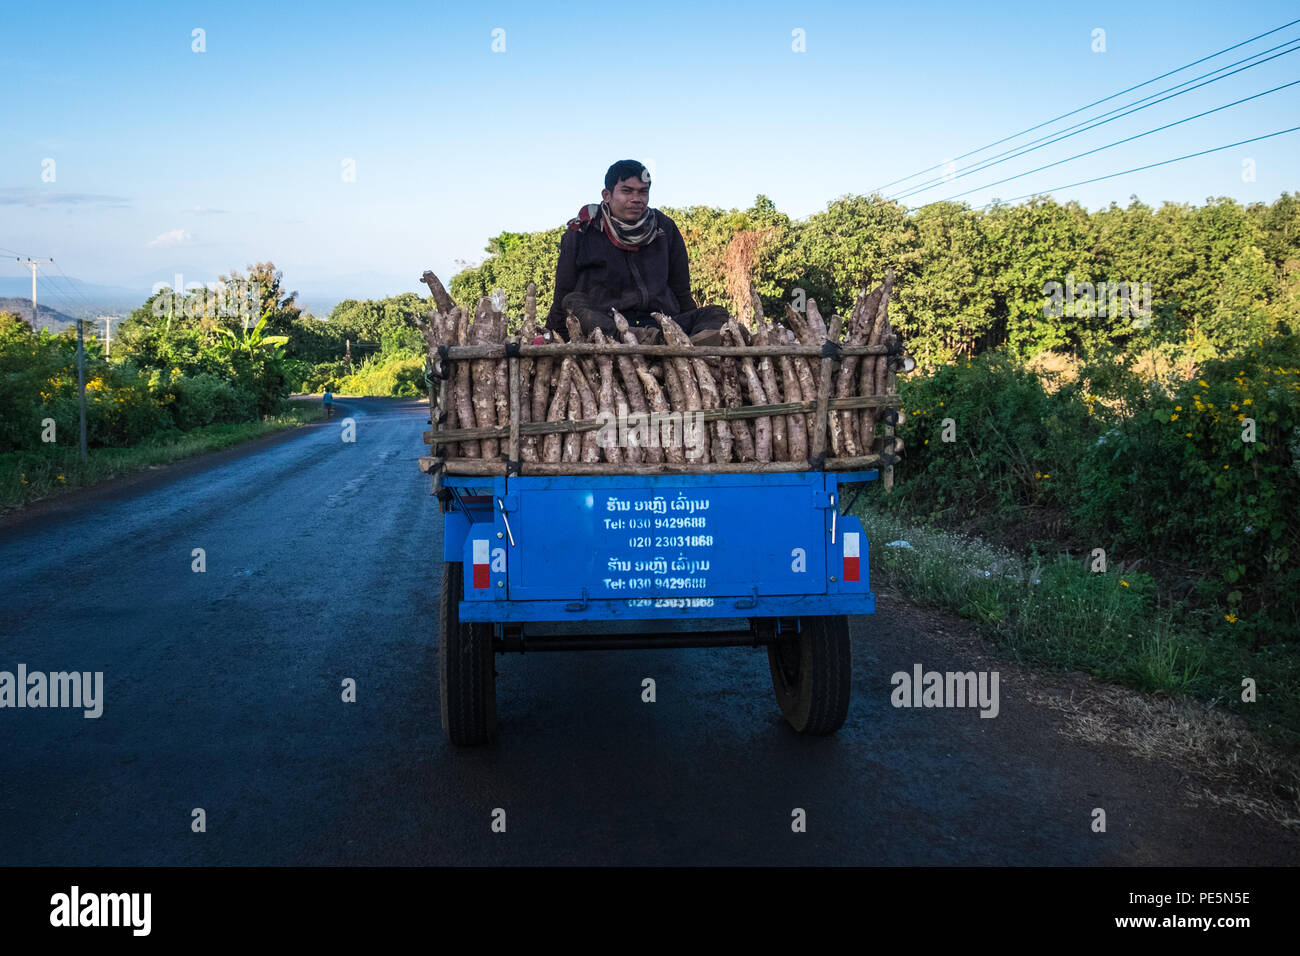 A farmer with a crop of Cassava root on his truck in the Bolaven Plateau, Laos Stock Photo